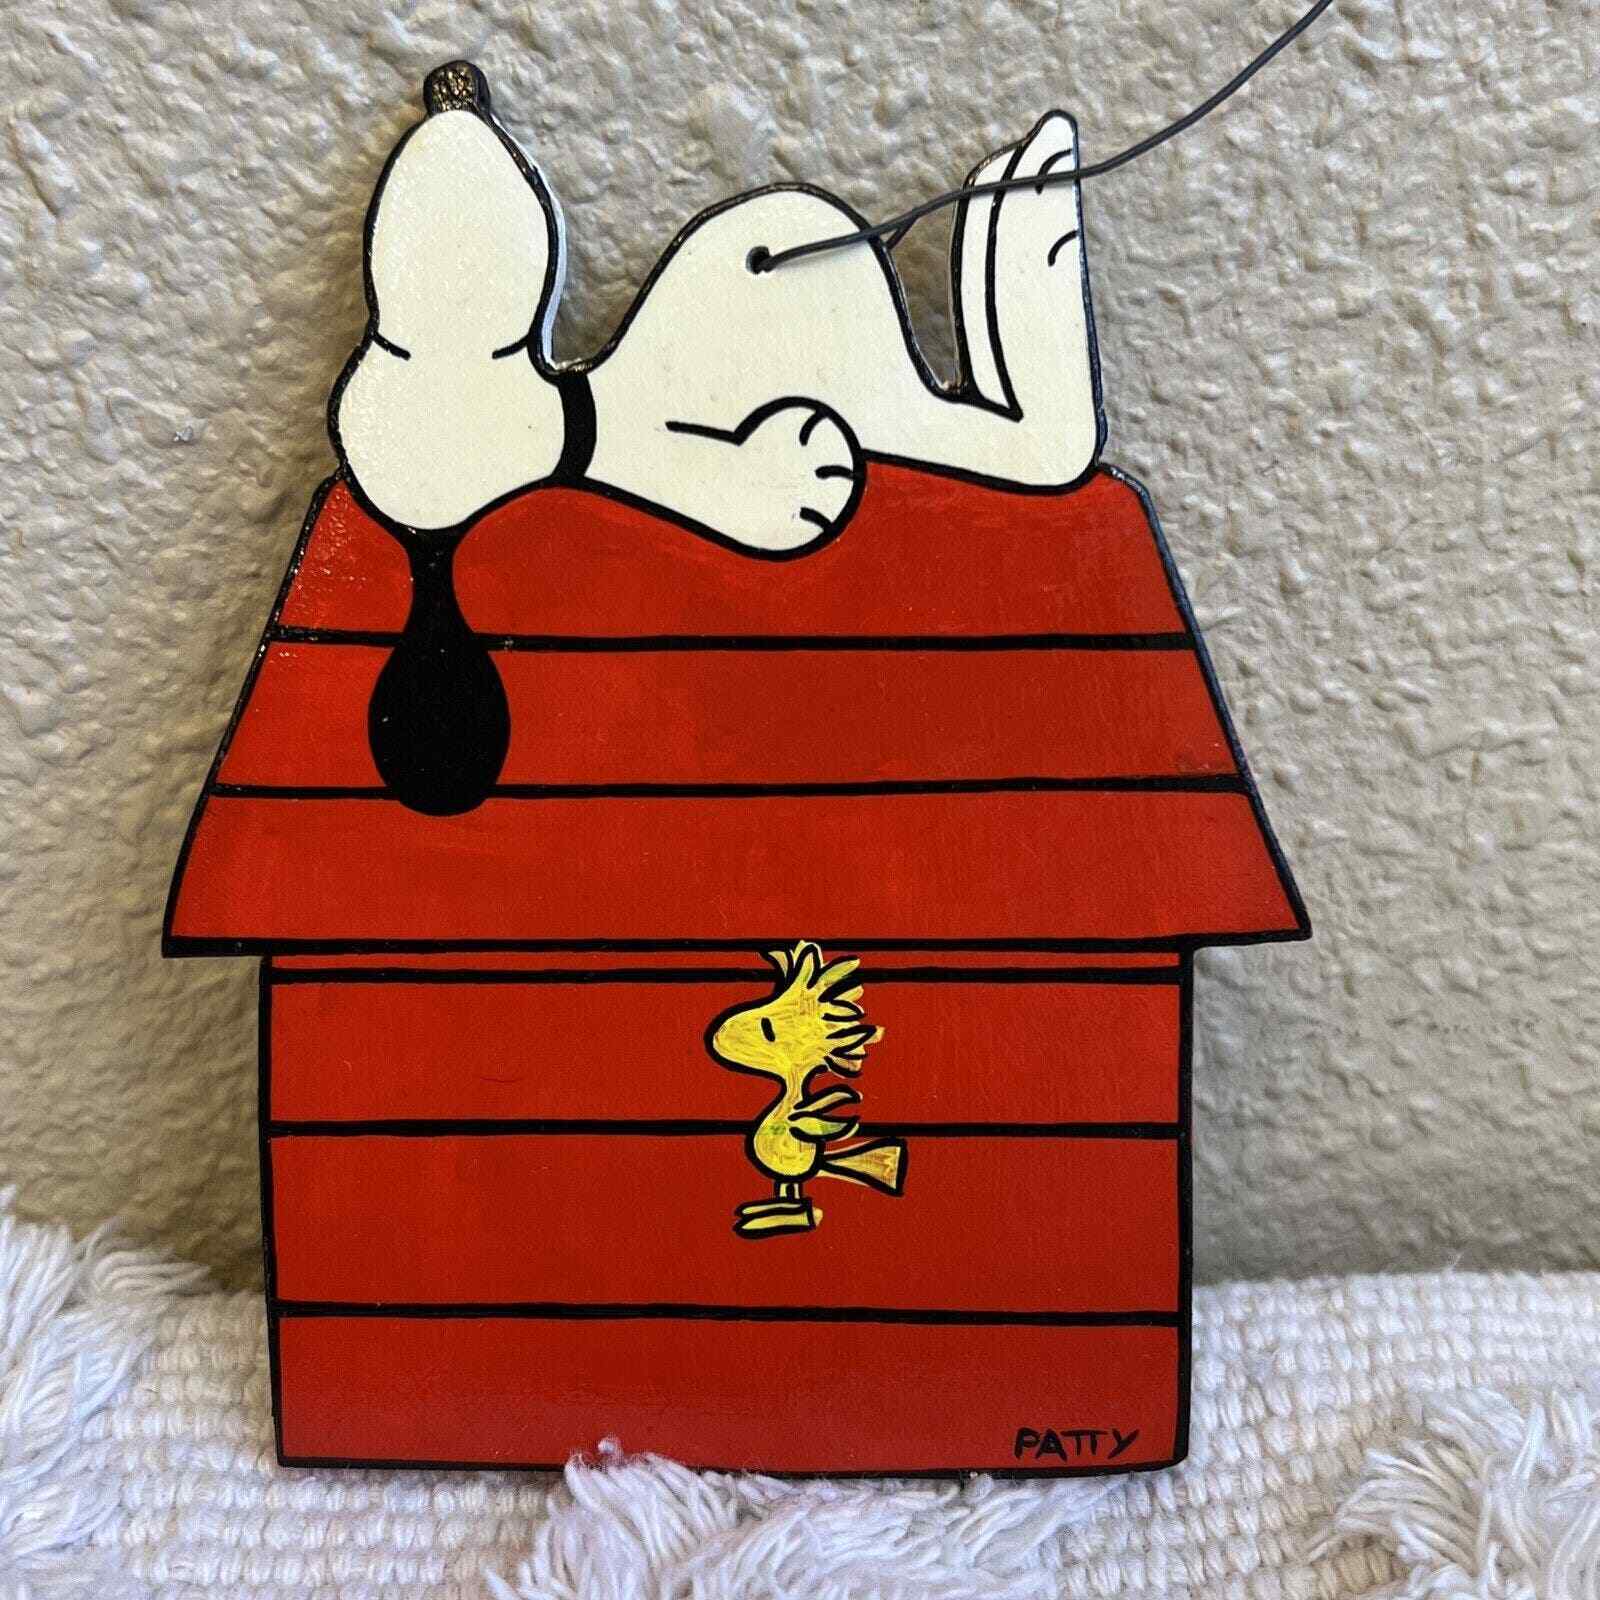 Vintage Snoopy & Woodstock Wooden Hand Painted Ornament Christmas Signed Patty